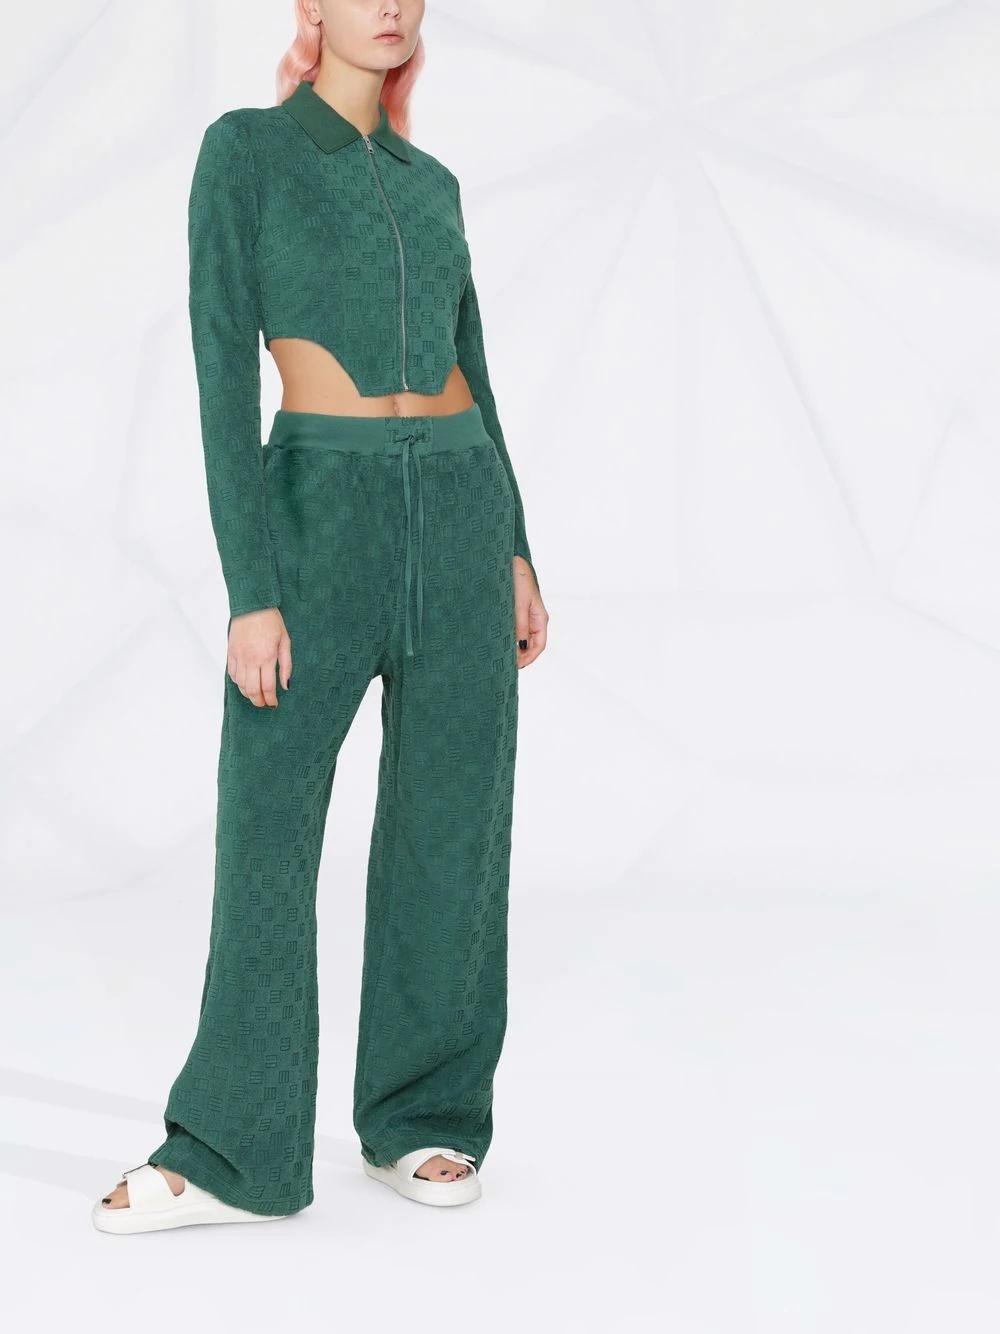 monogram jacquard knitted trousers - 3